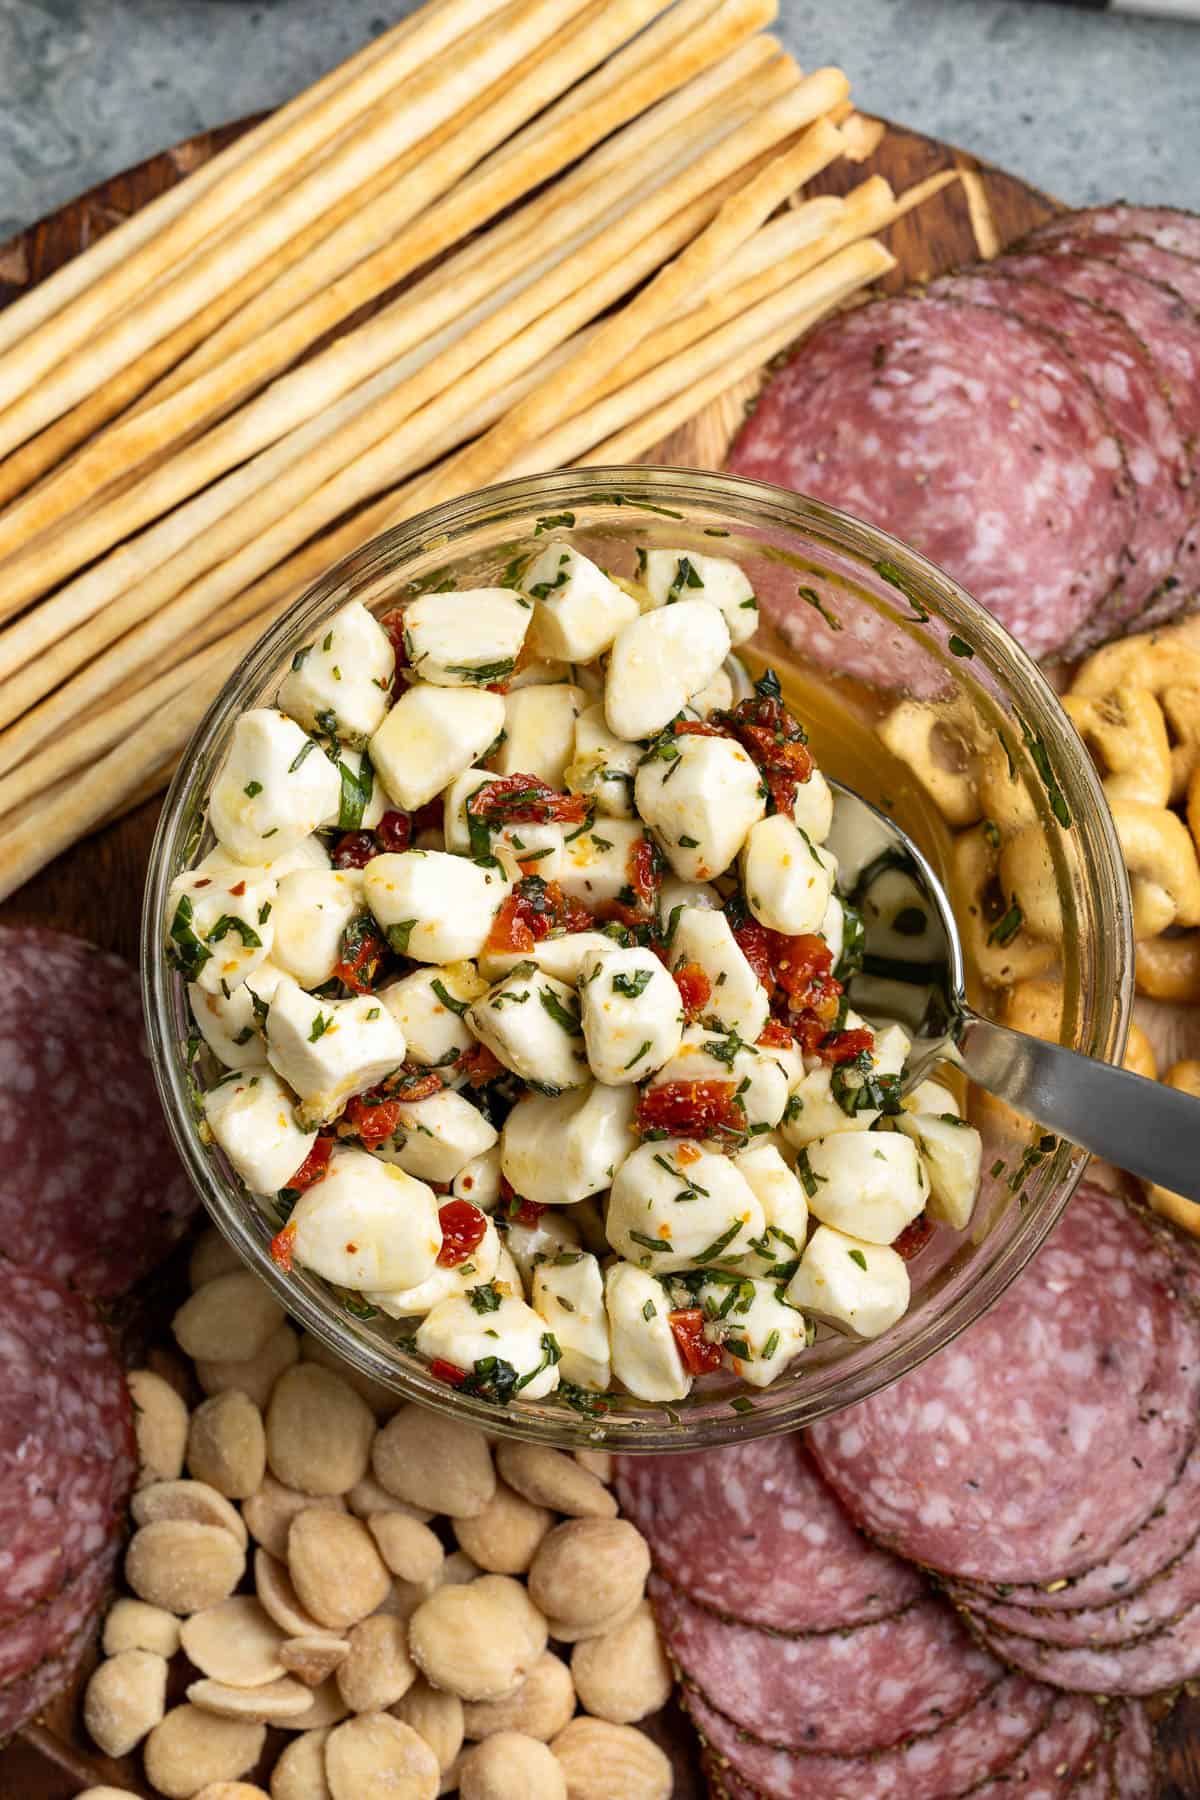 An antipasto platter including marinated mozzarella balls, cured meats, almonds and crackers.